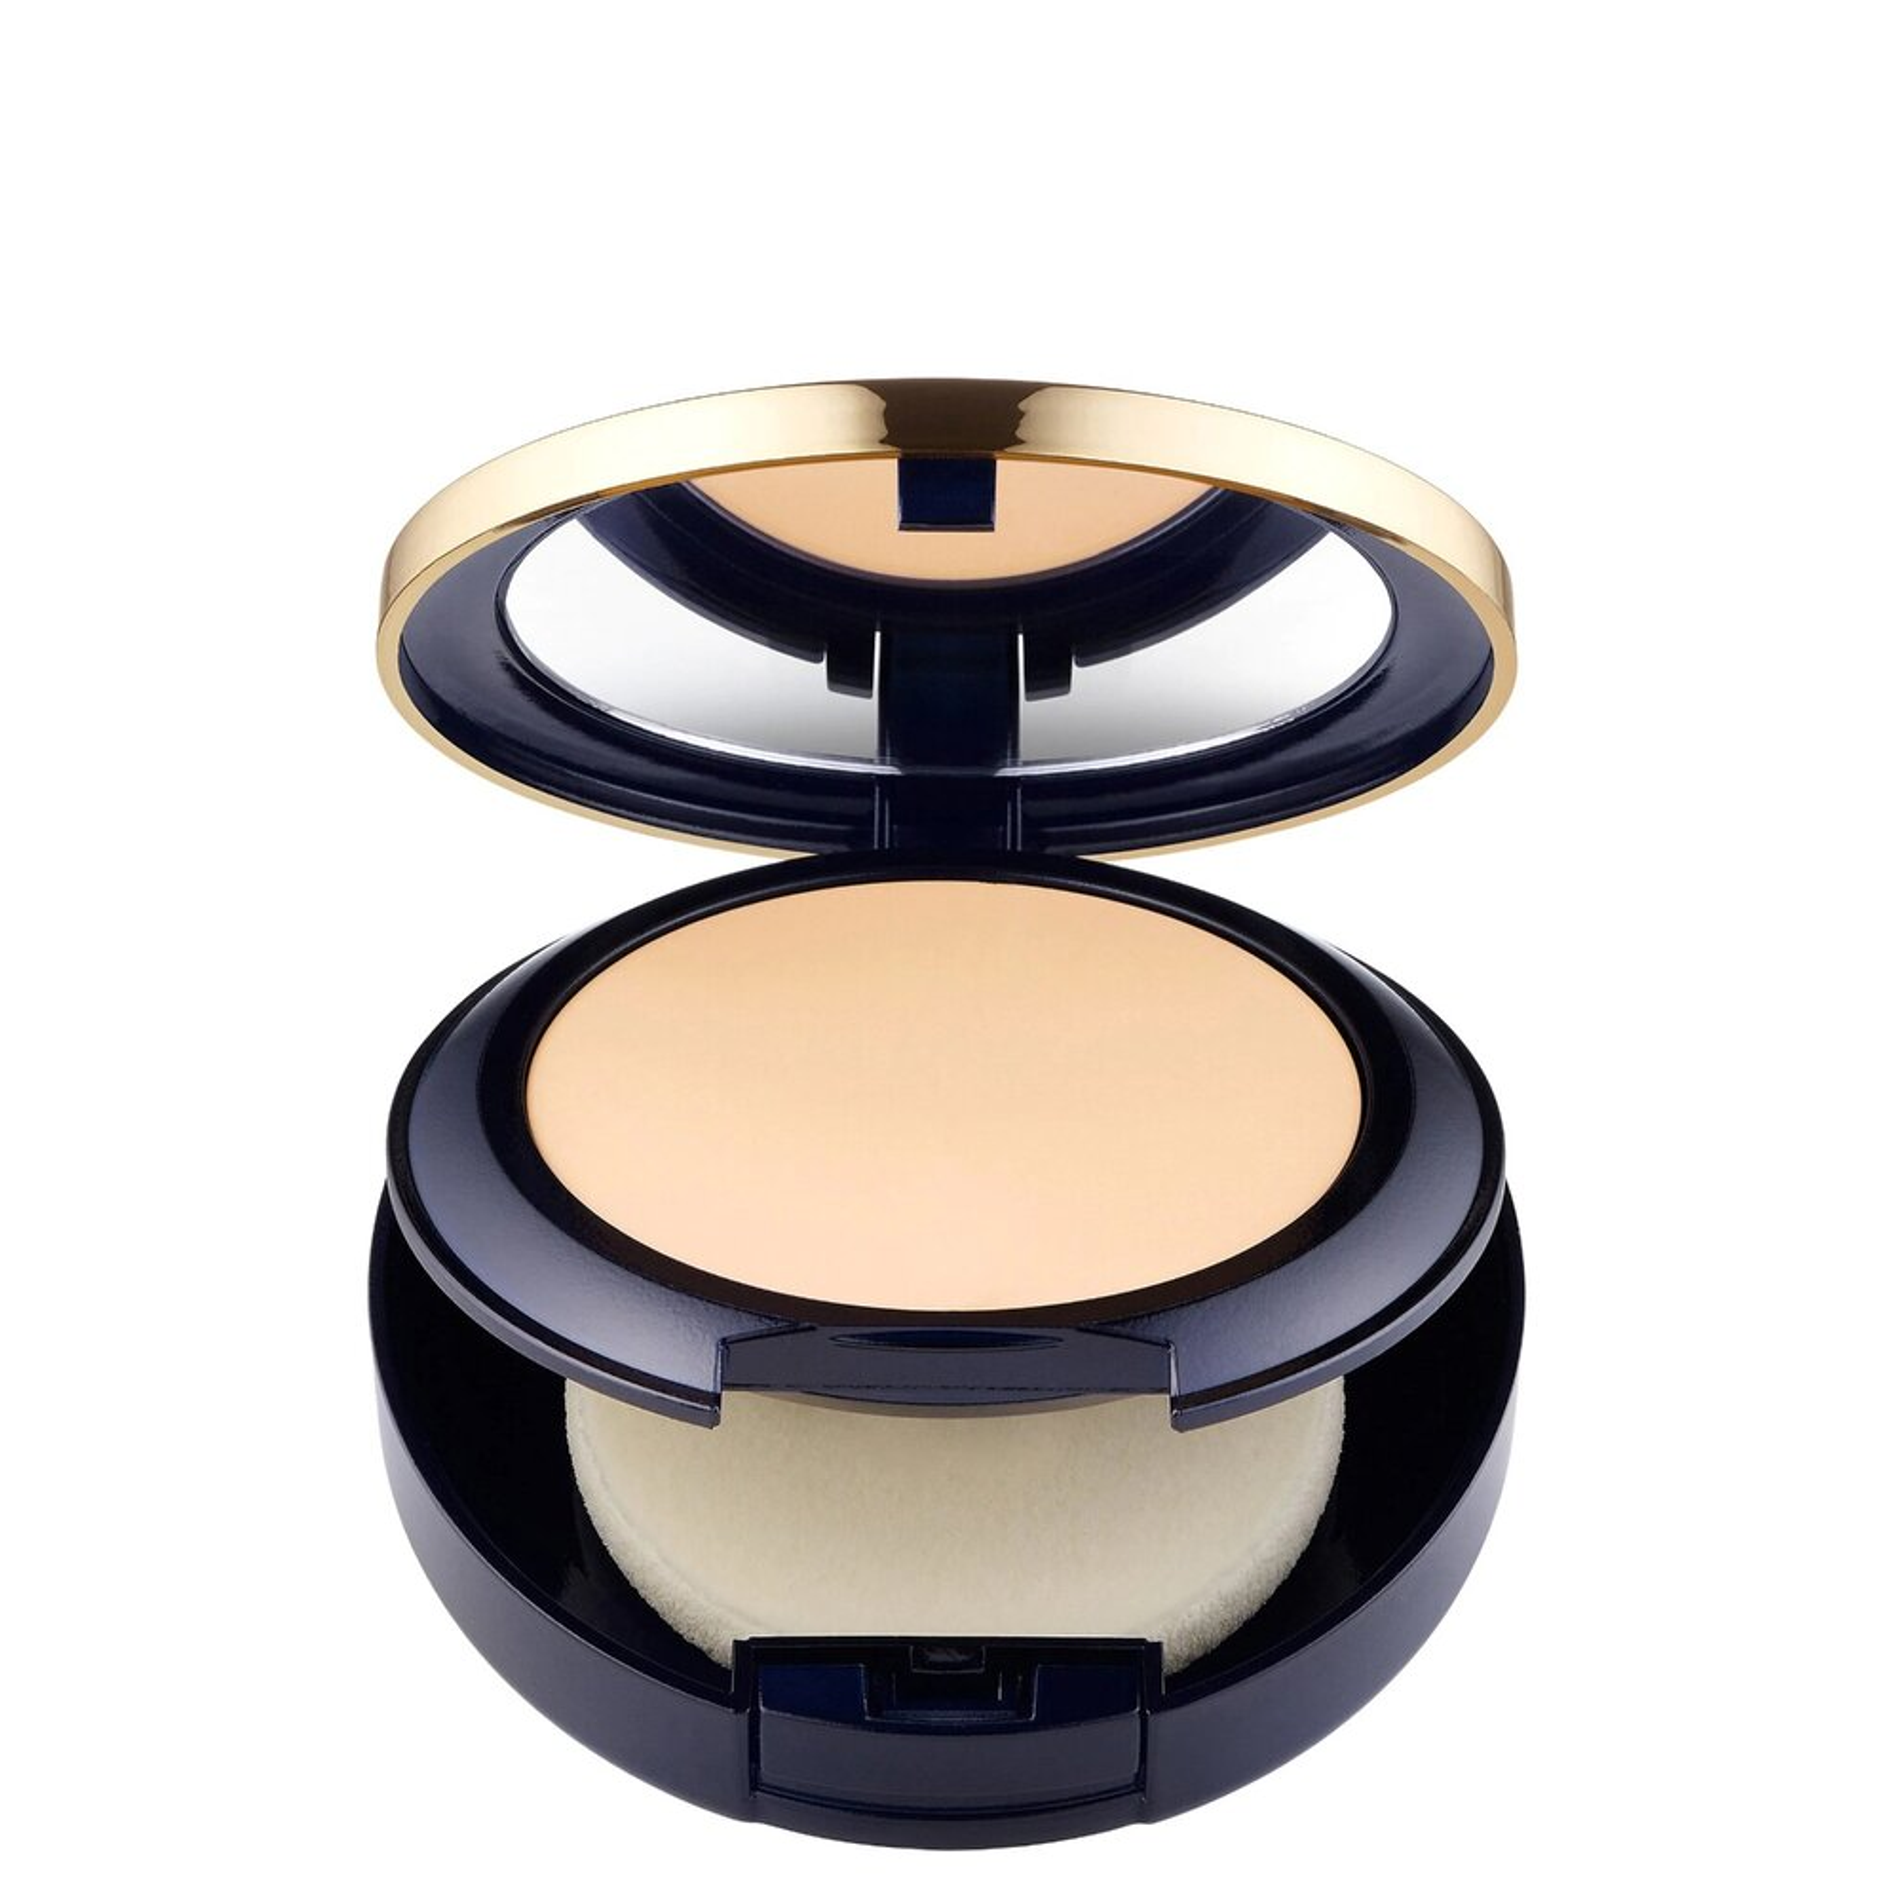 phan-phu-estee-lauder-double-wear-stay-in-place-matte-powder-foundation-12g-8